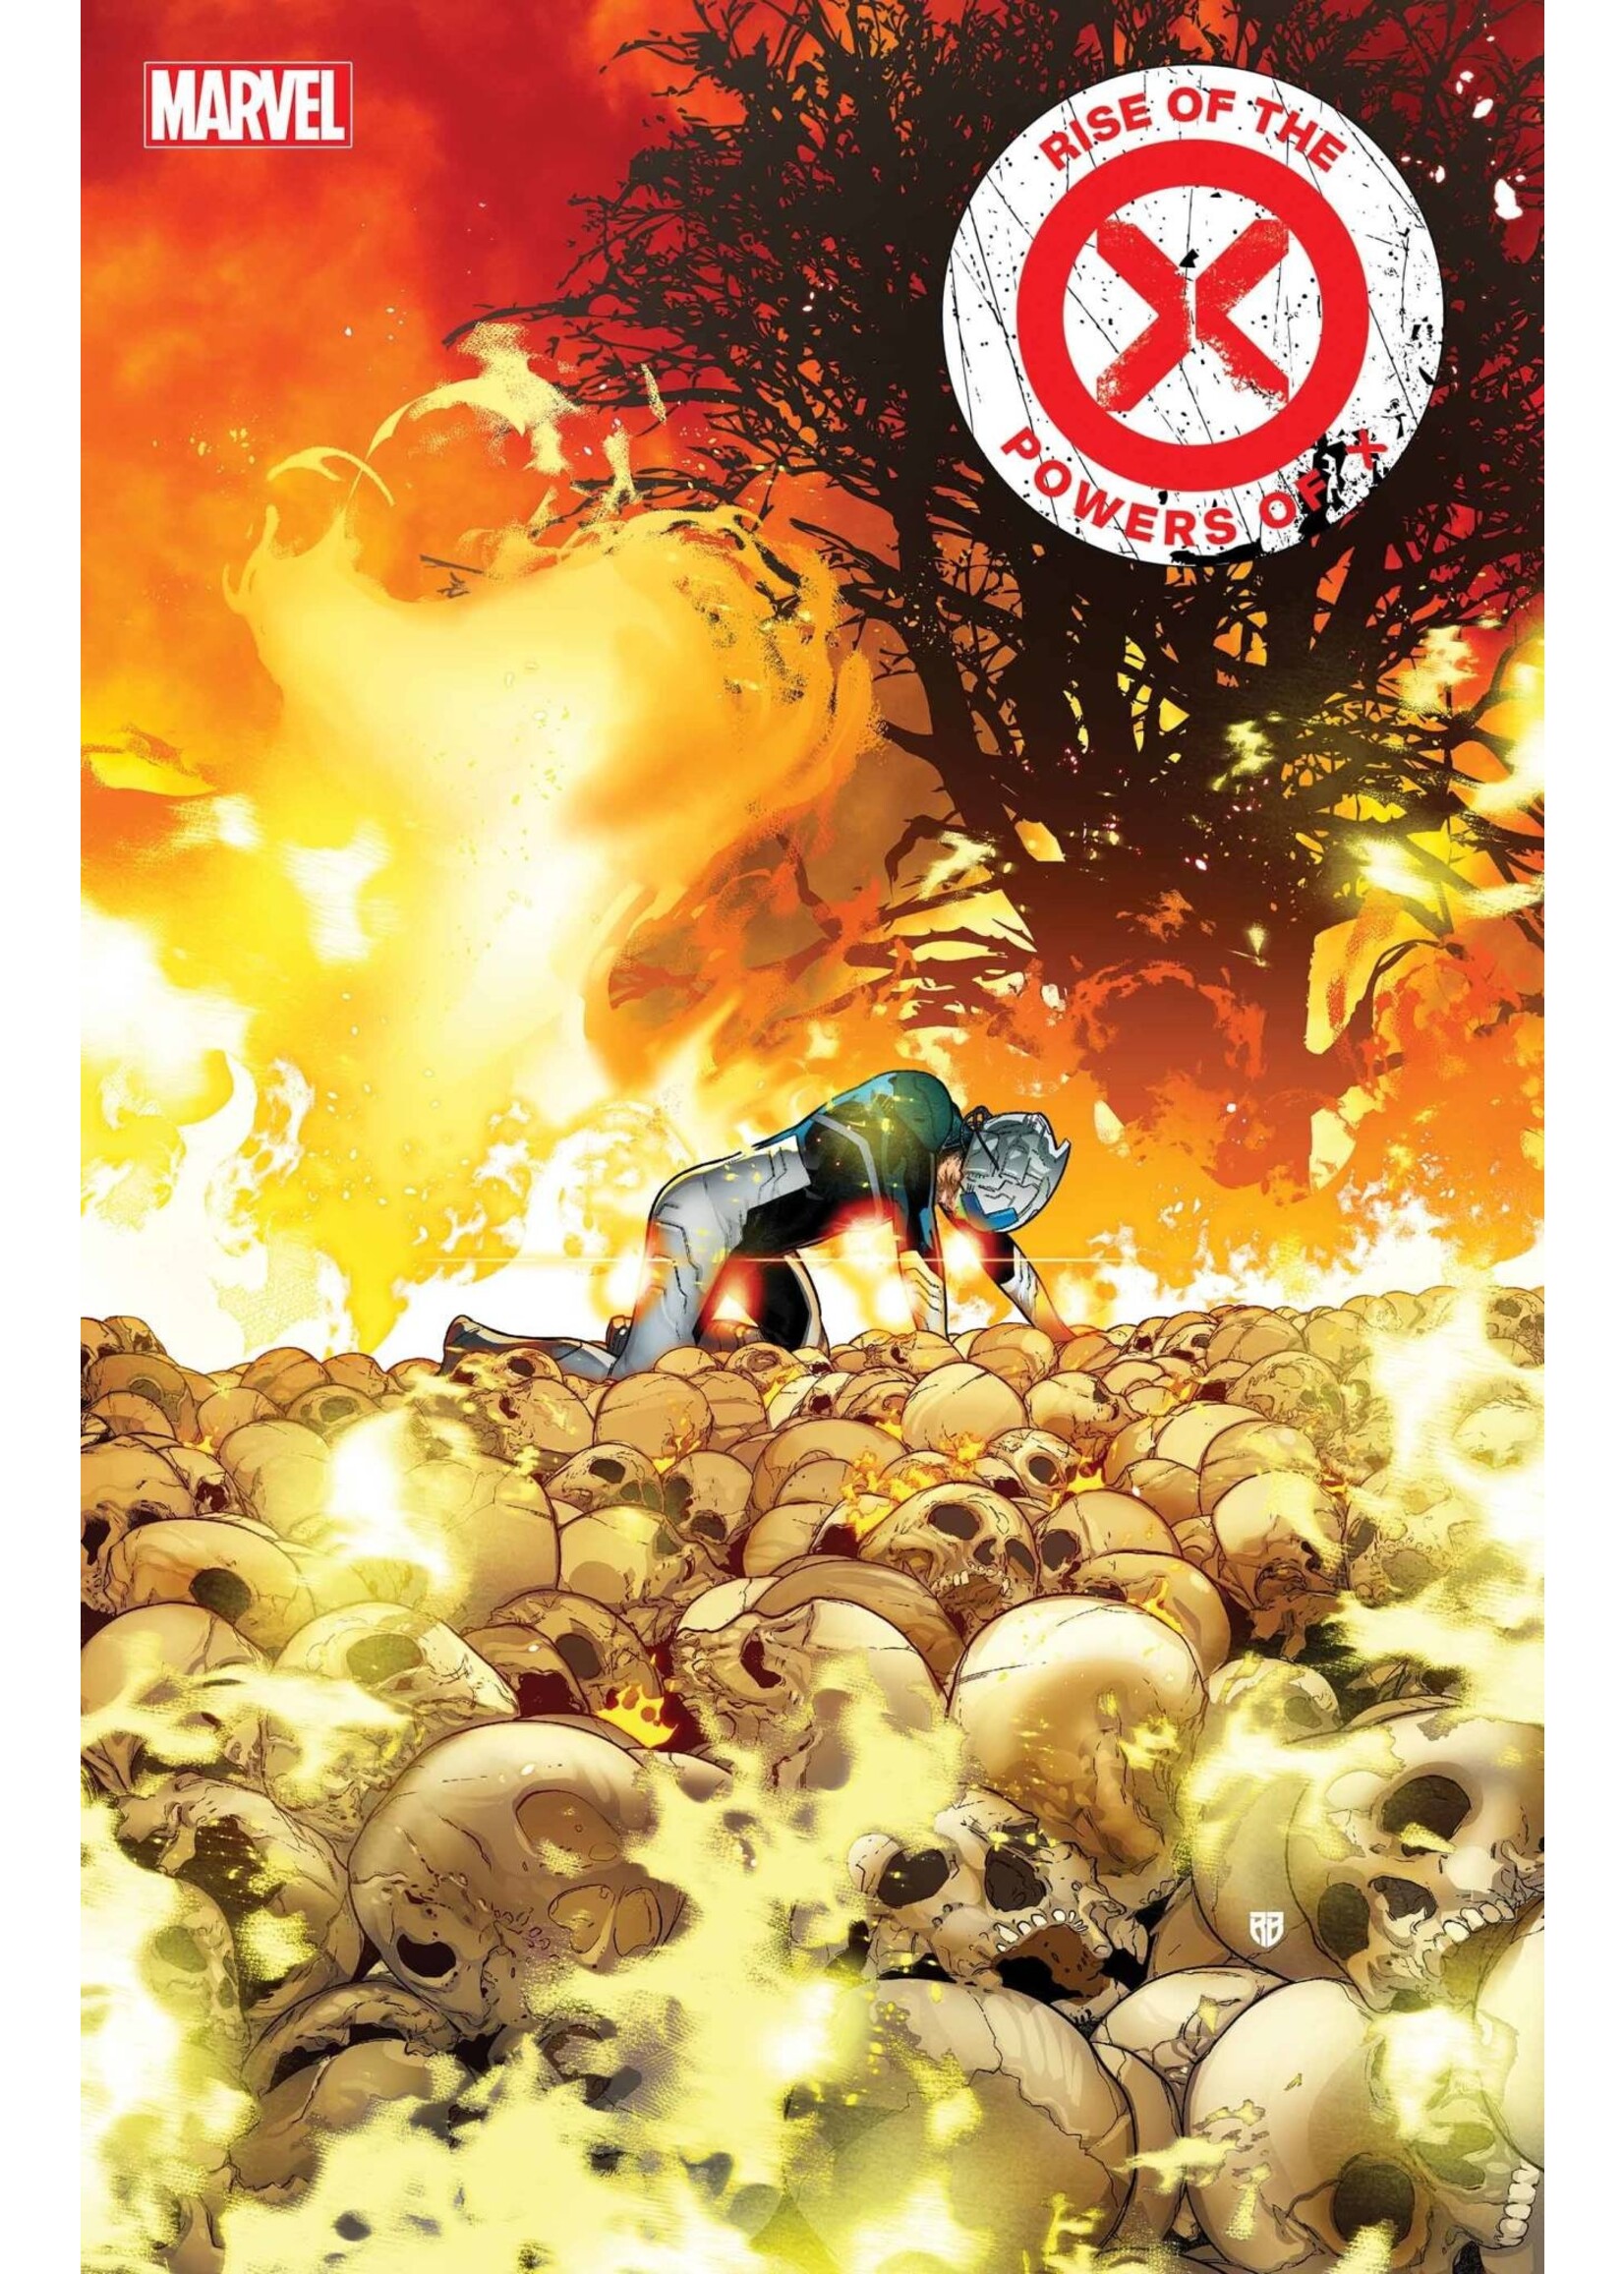 MARVEL COMICS RISE OF THE POWERS OF X #4 [FHX]